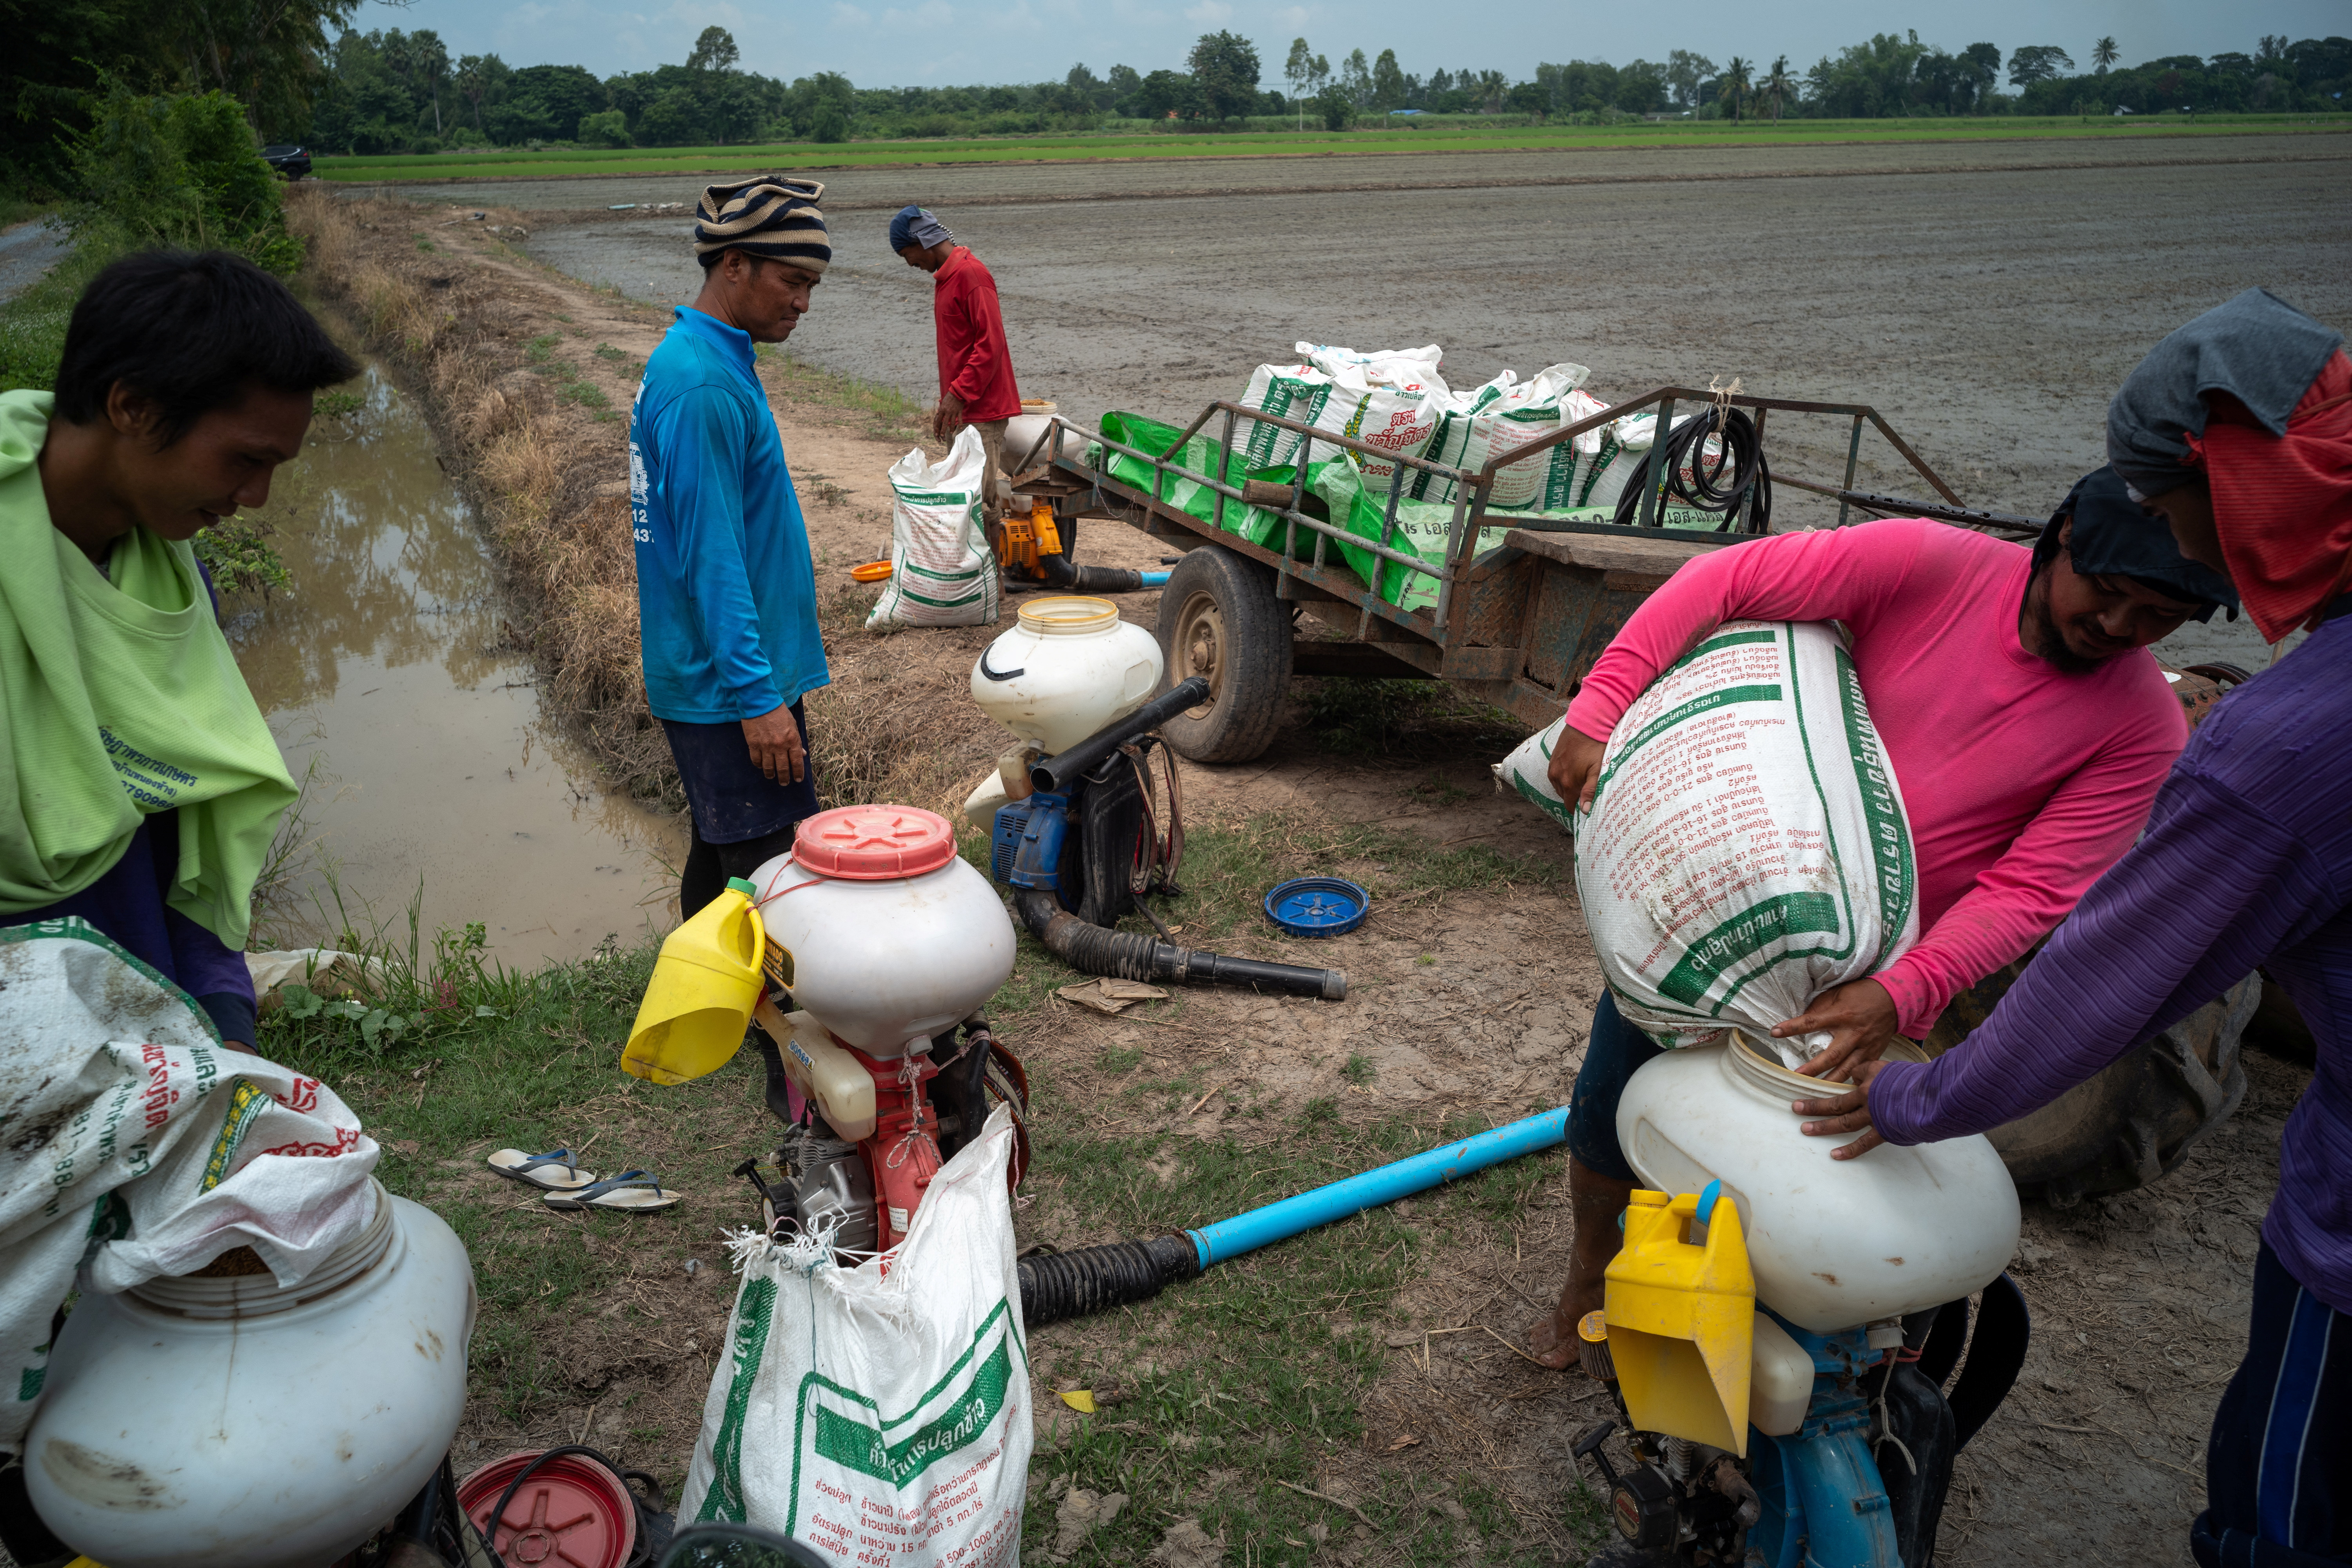 Thai rice farmers choose a risky path, trapped between debt and drought